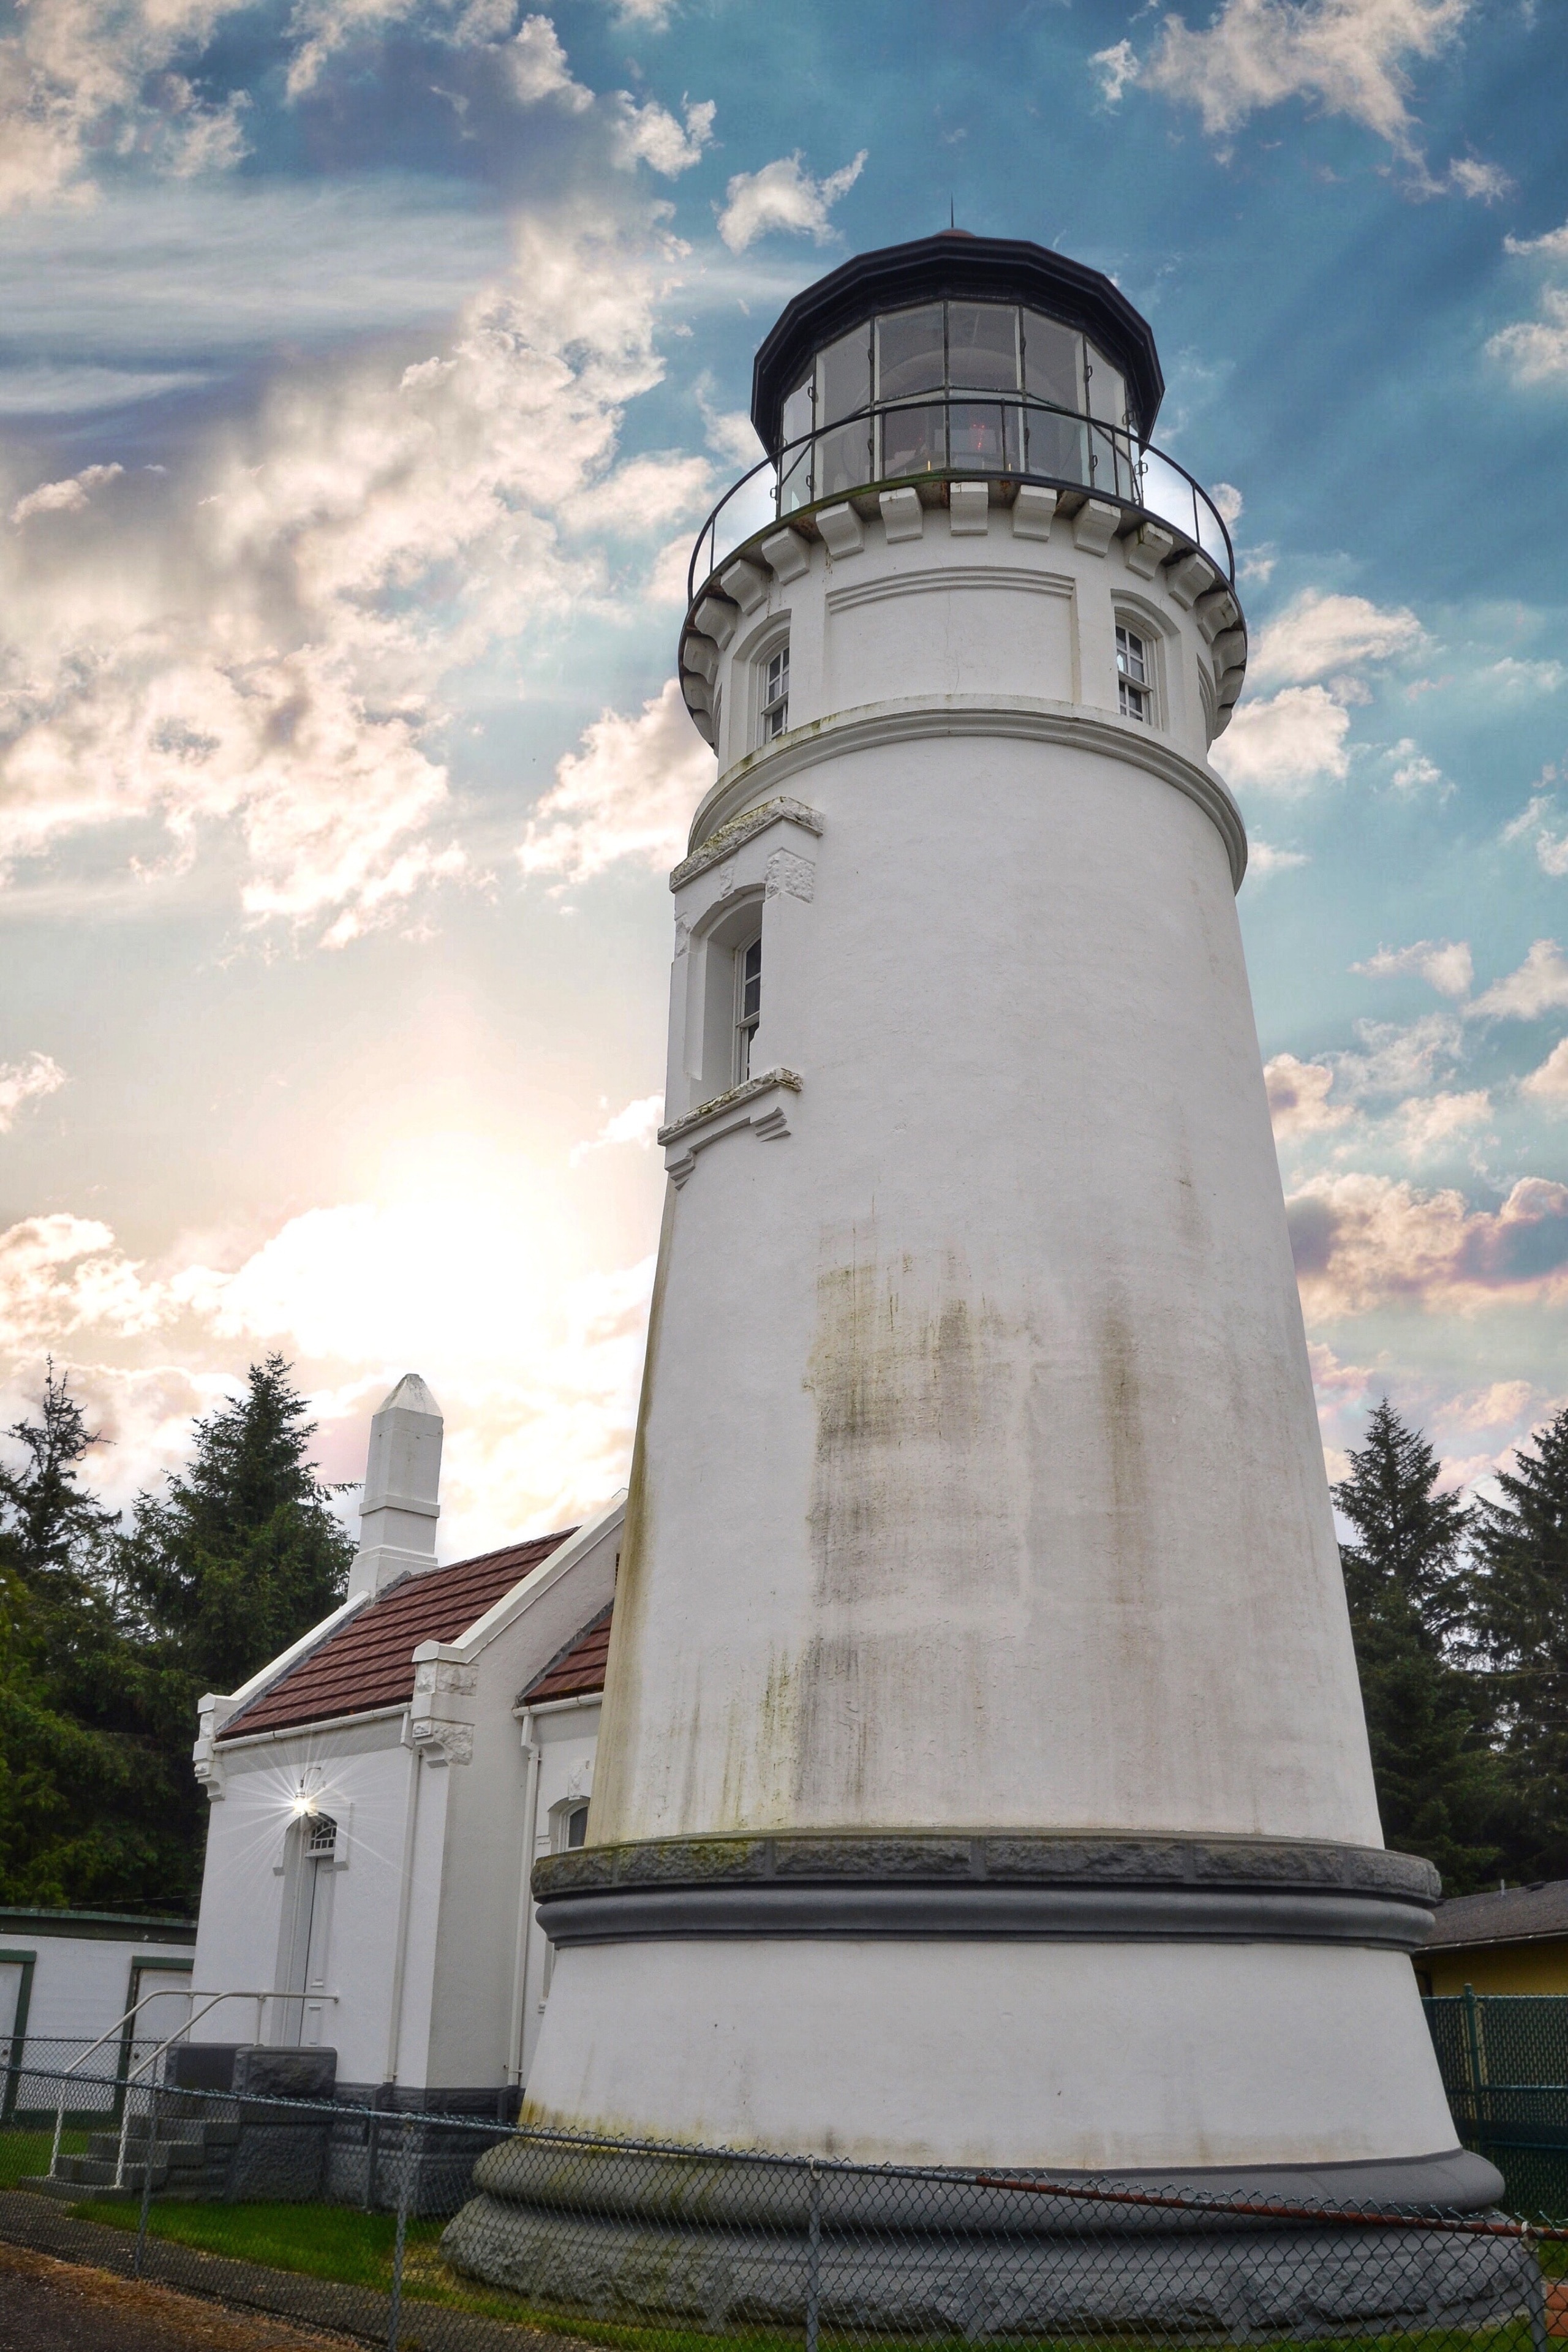 #OnTheRoad another beautiful #lighthouse on the Oregon Coast